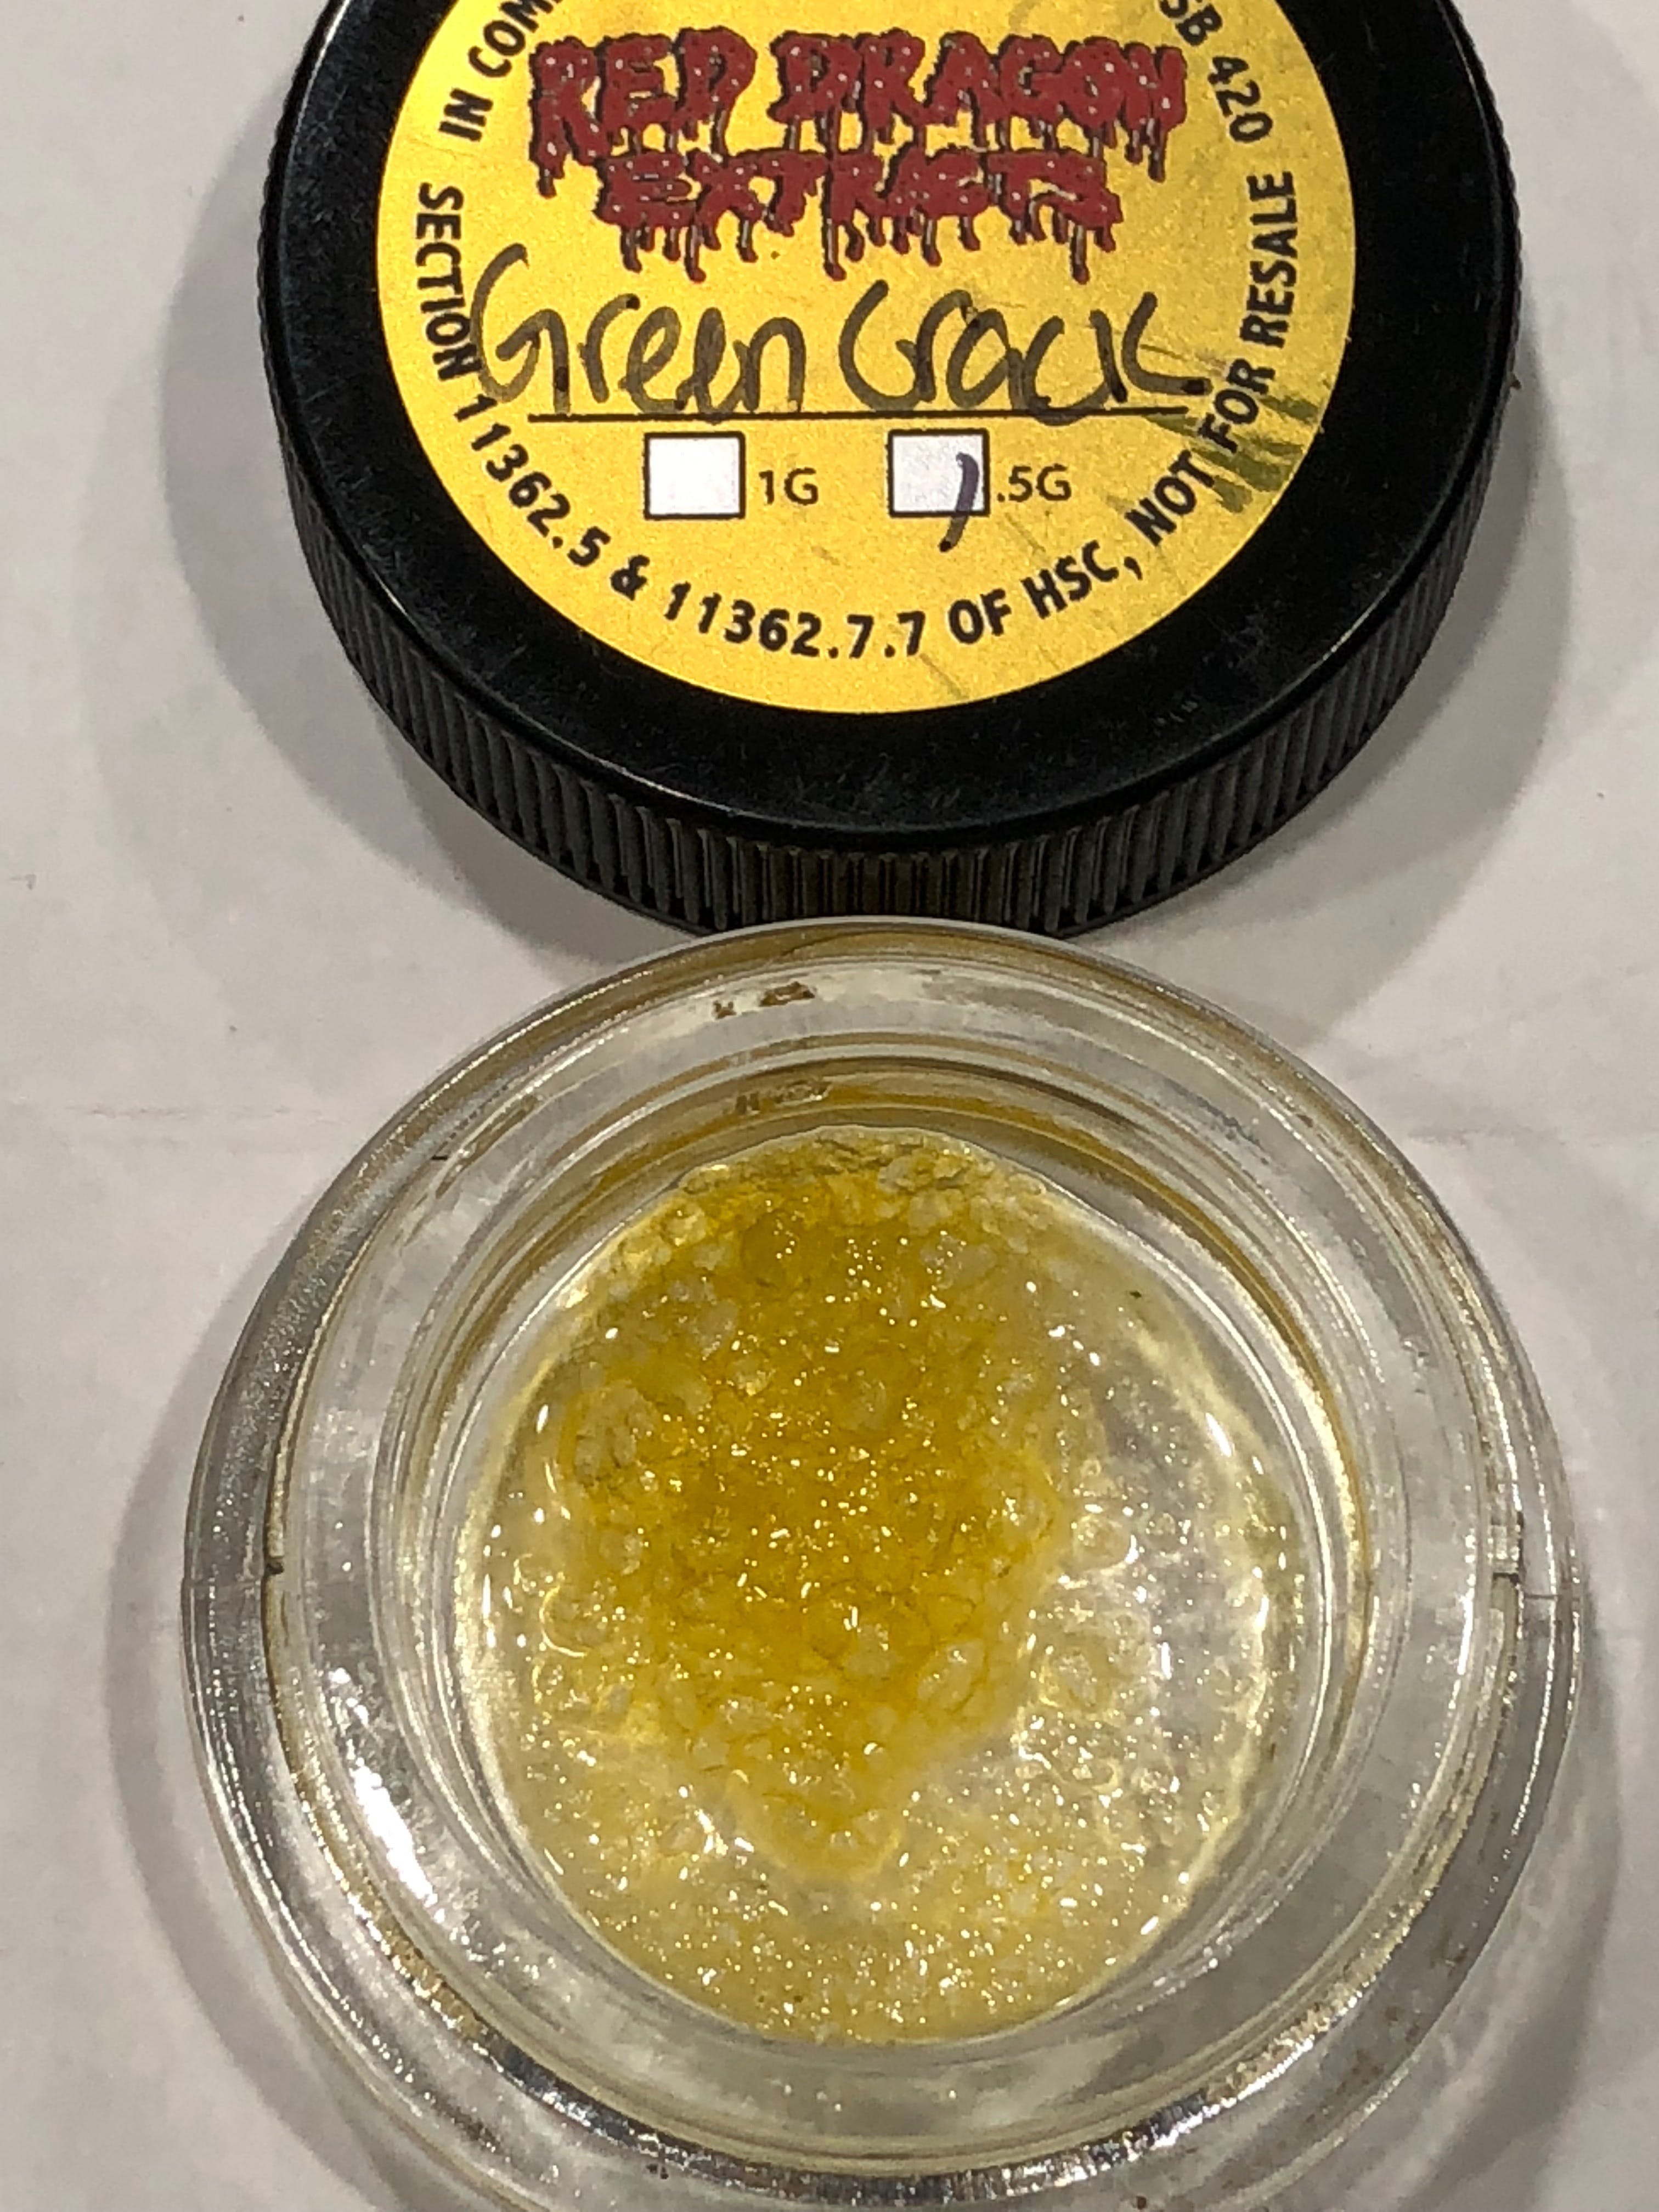 concentrate-red-dragon-5g-terp-sauce1g-for-2455